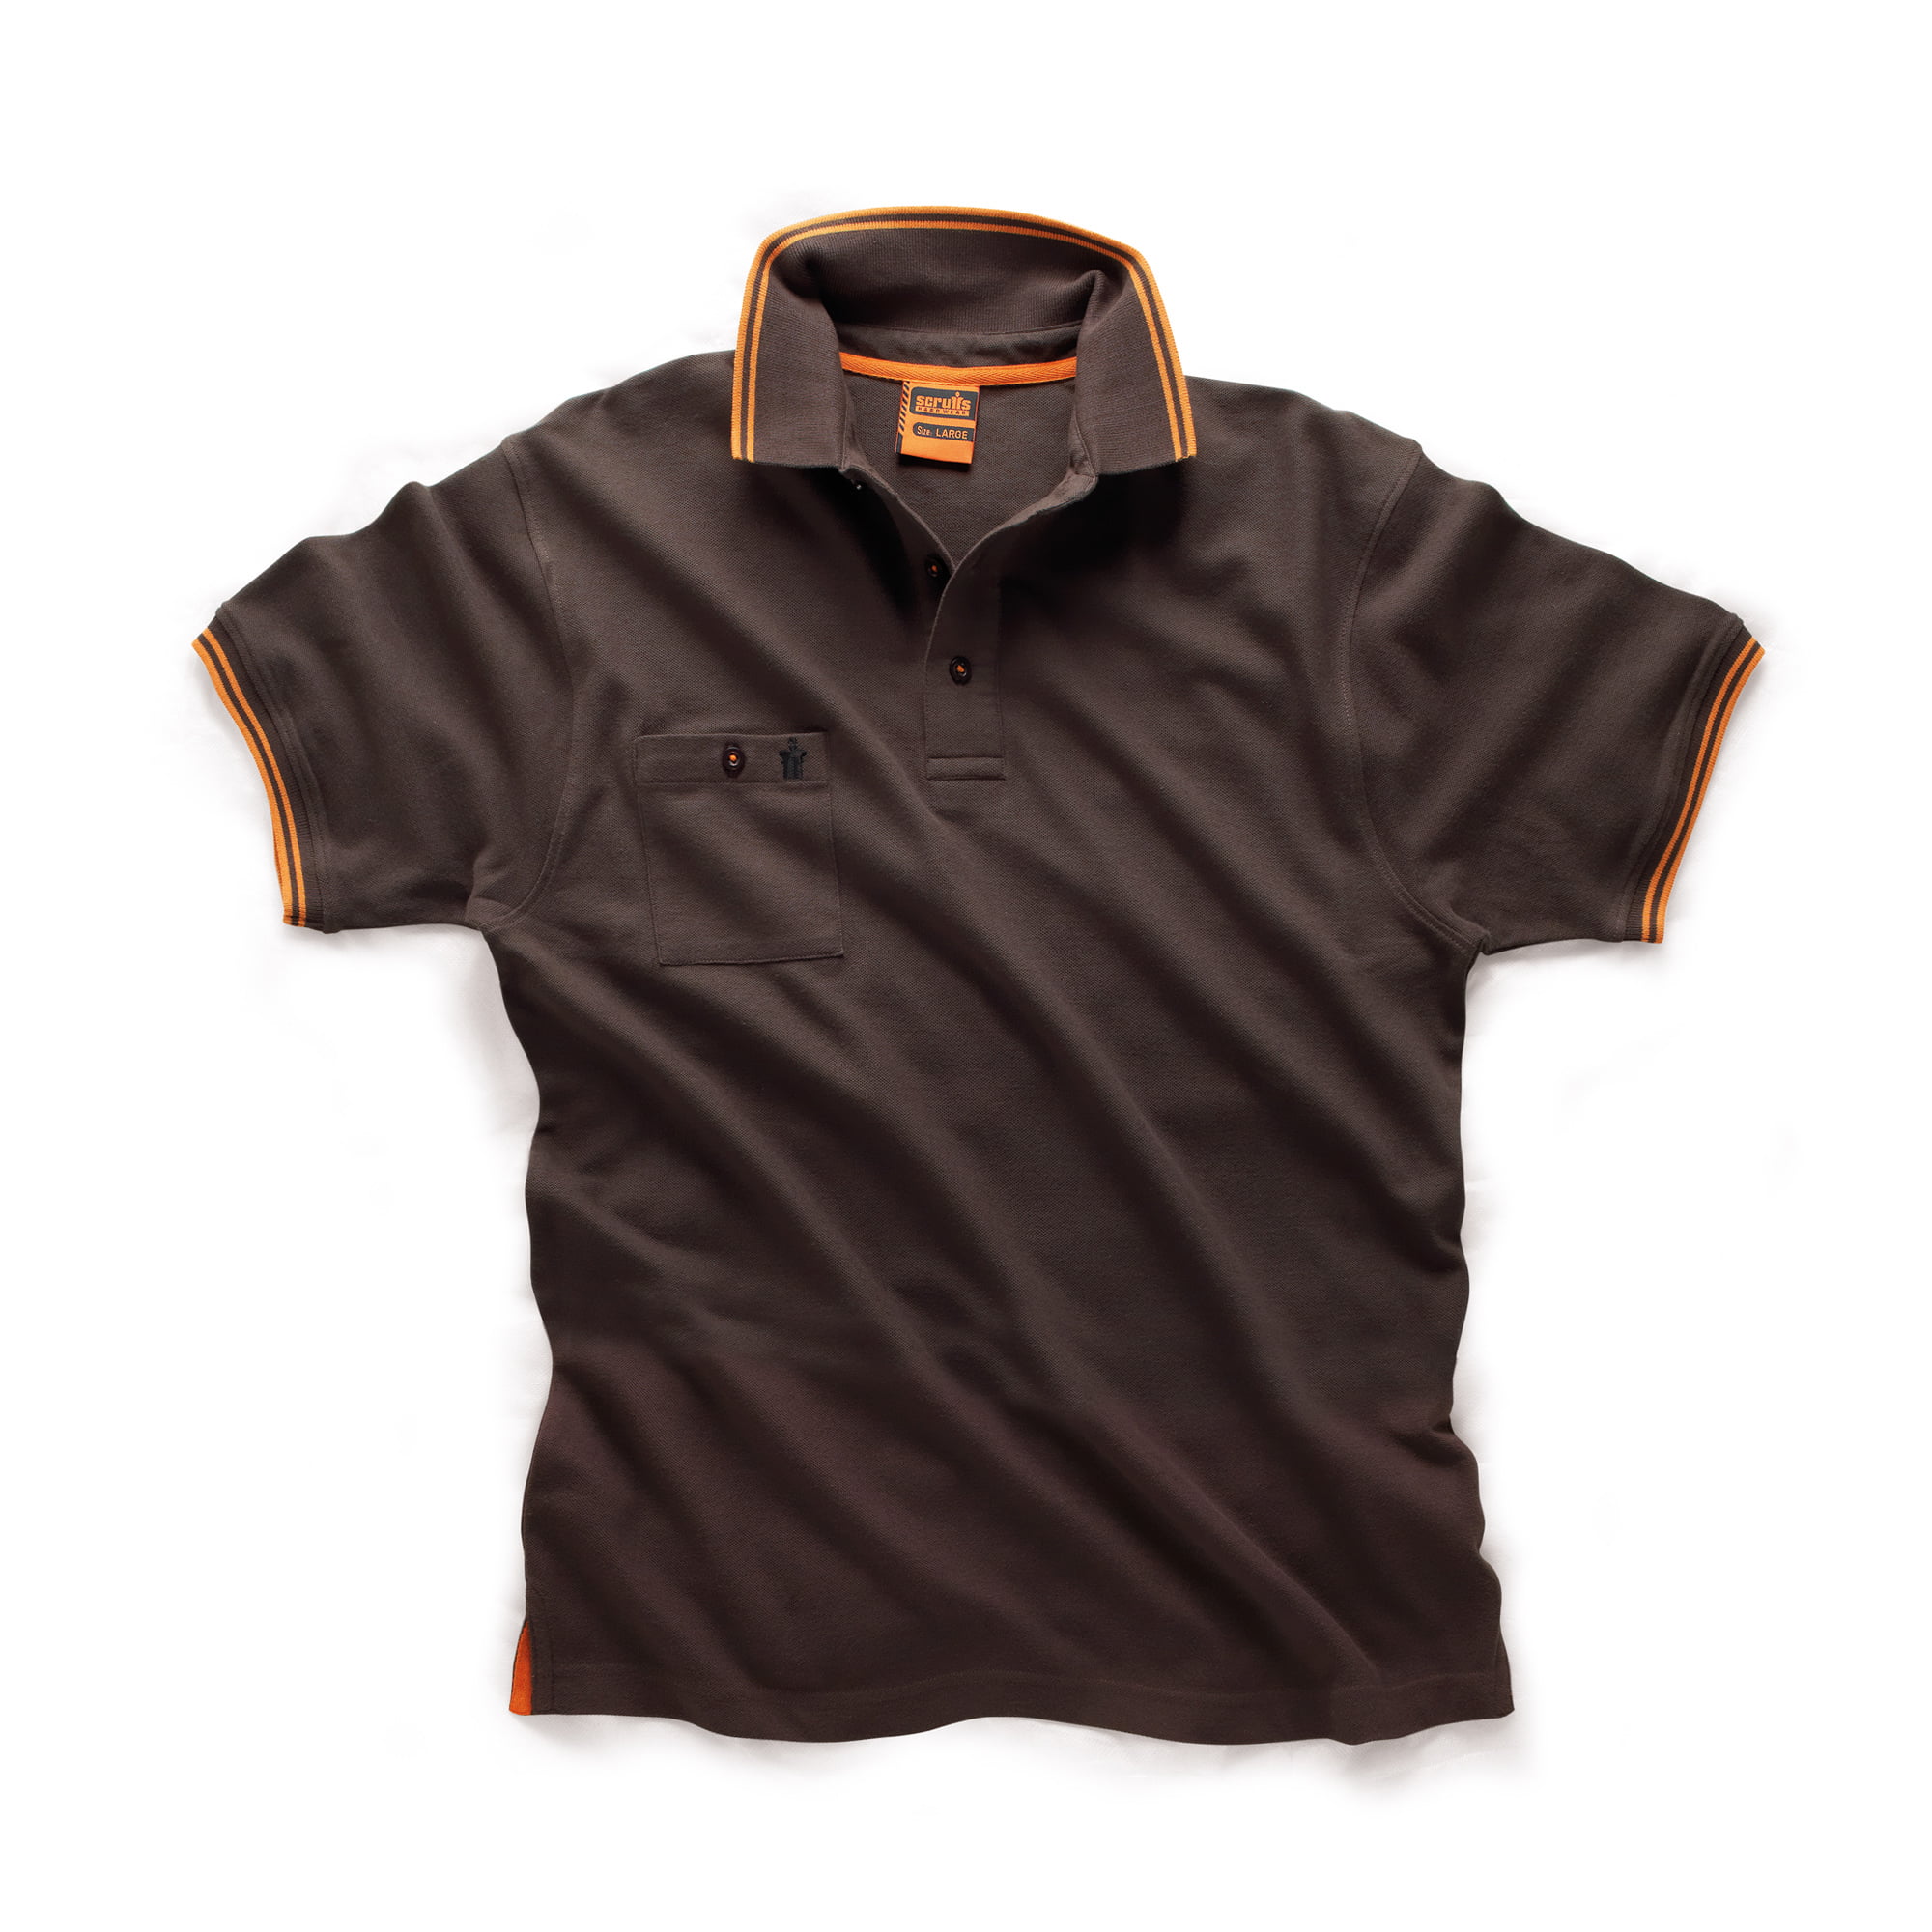 Scruffs brown polo with orange collar and sleeve detail